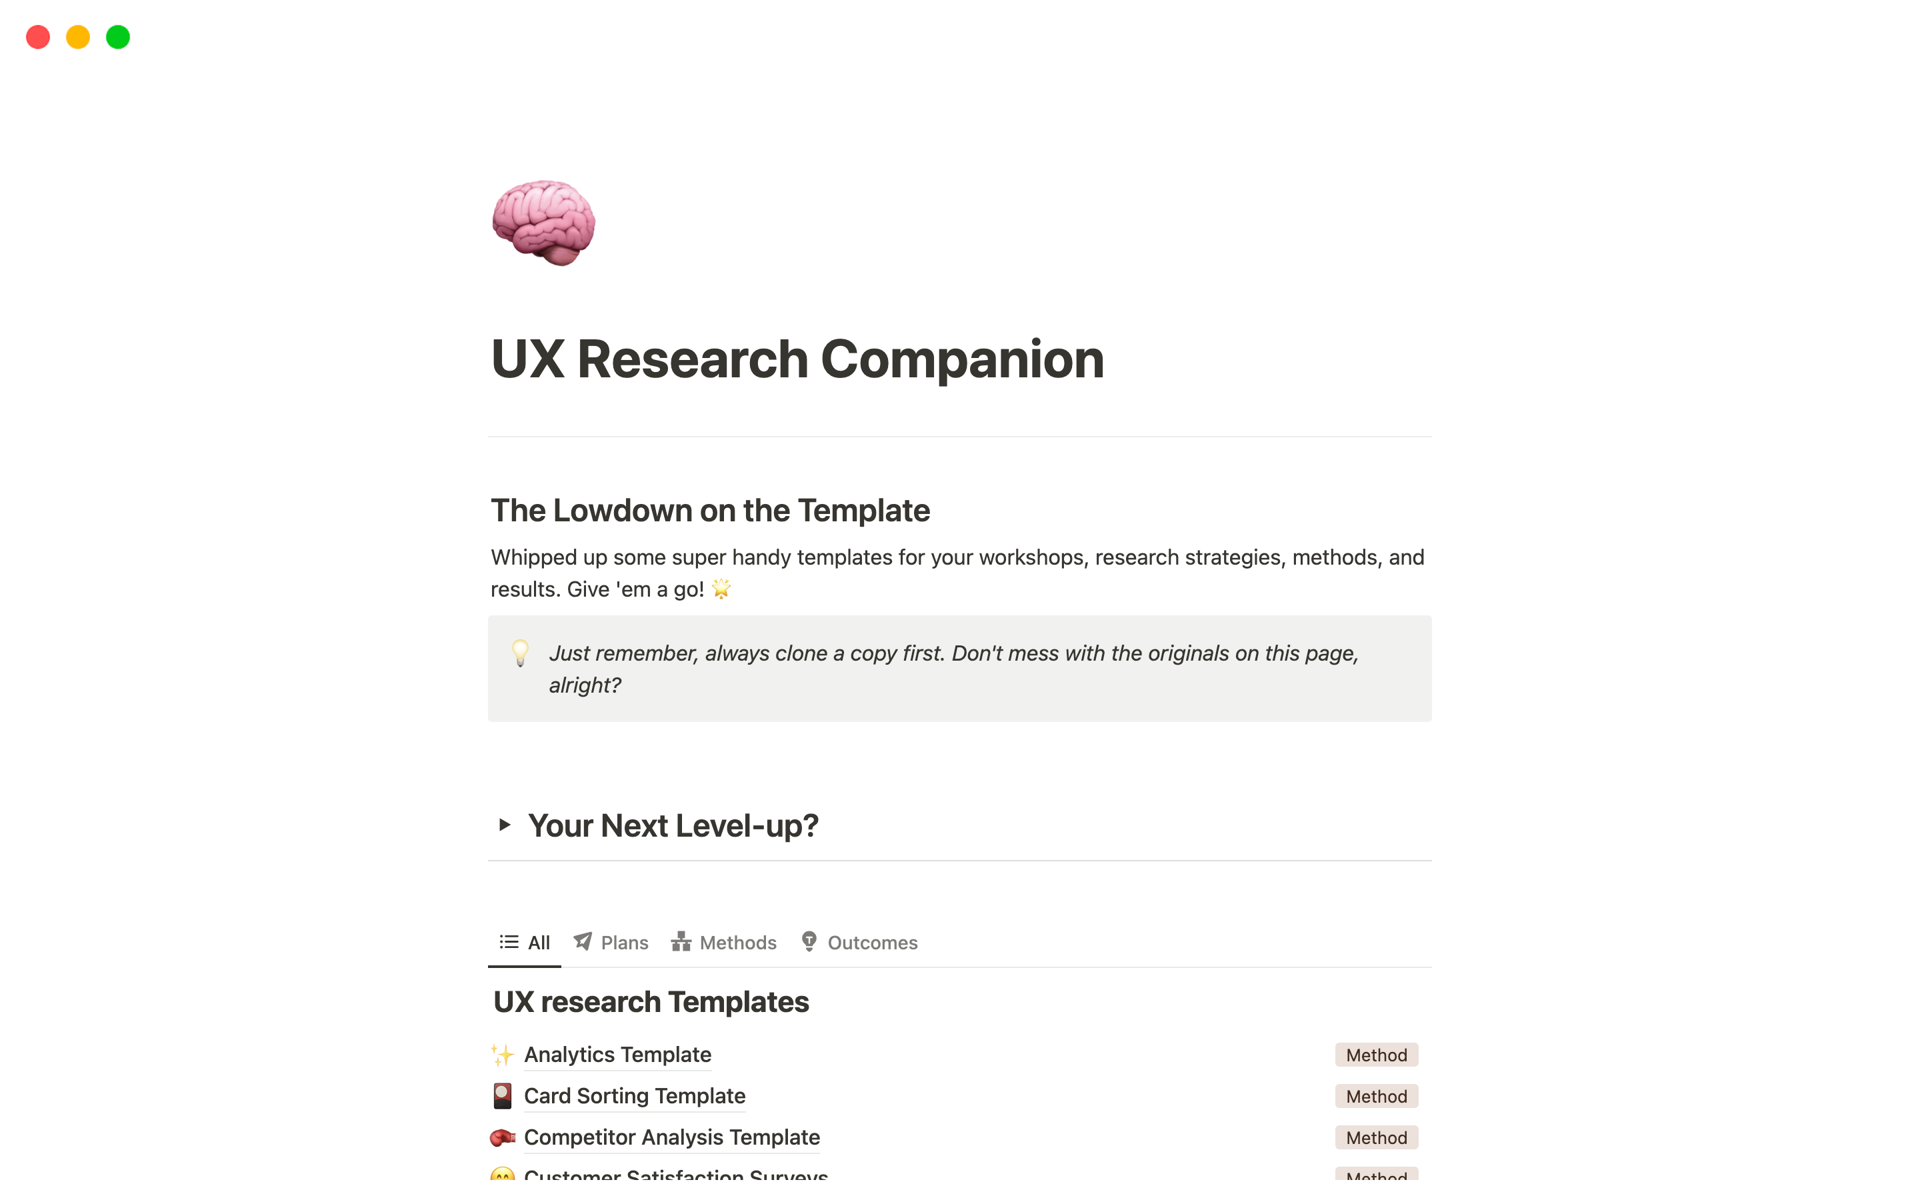 UX Research Companion: The Ultimate Research Partner" - your fun sidekick for smarter, smoother, and more engaging UX research adventures!